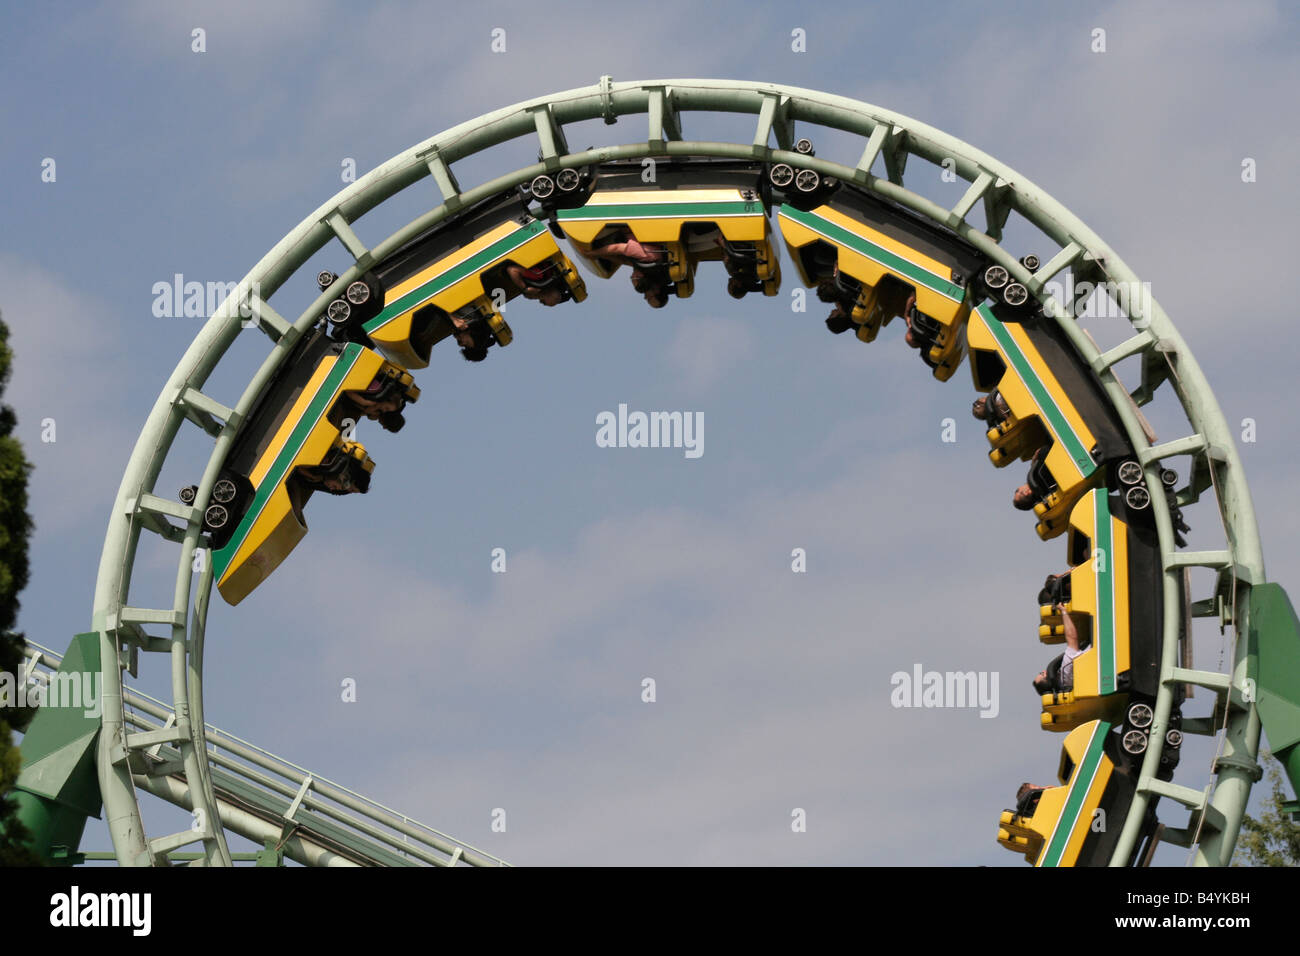 People on a roller-coaster ride Stock Photo